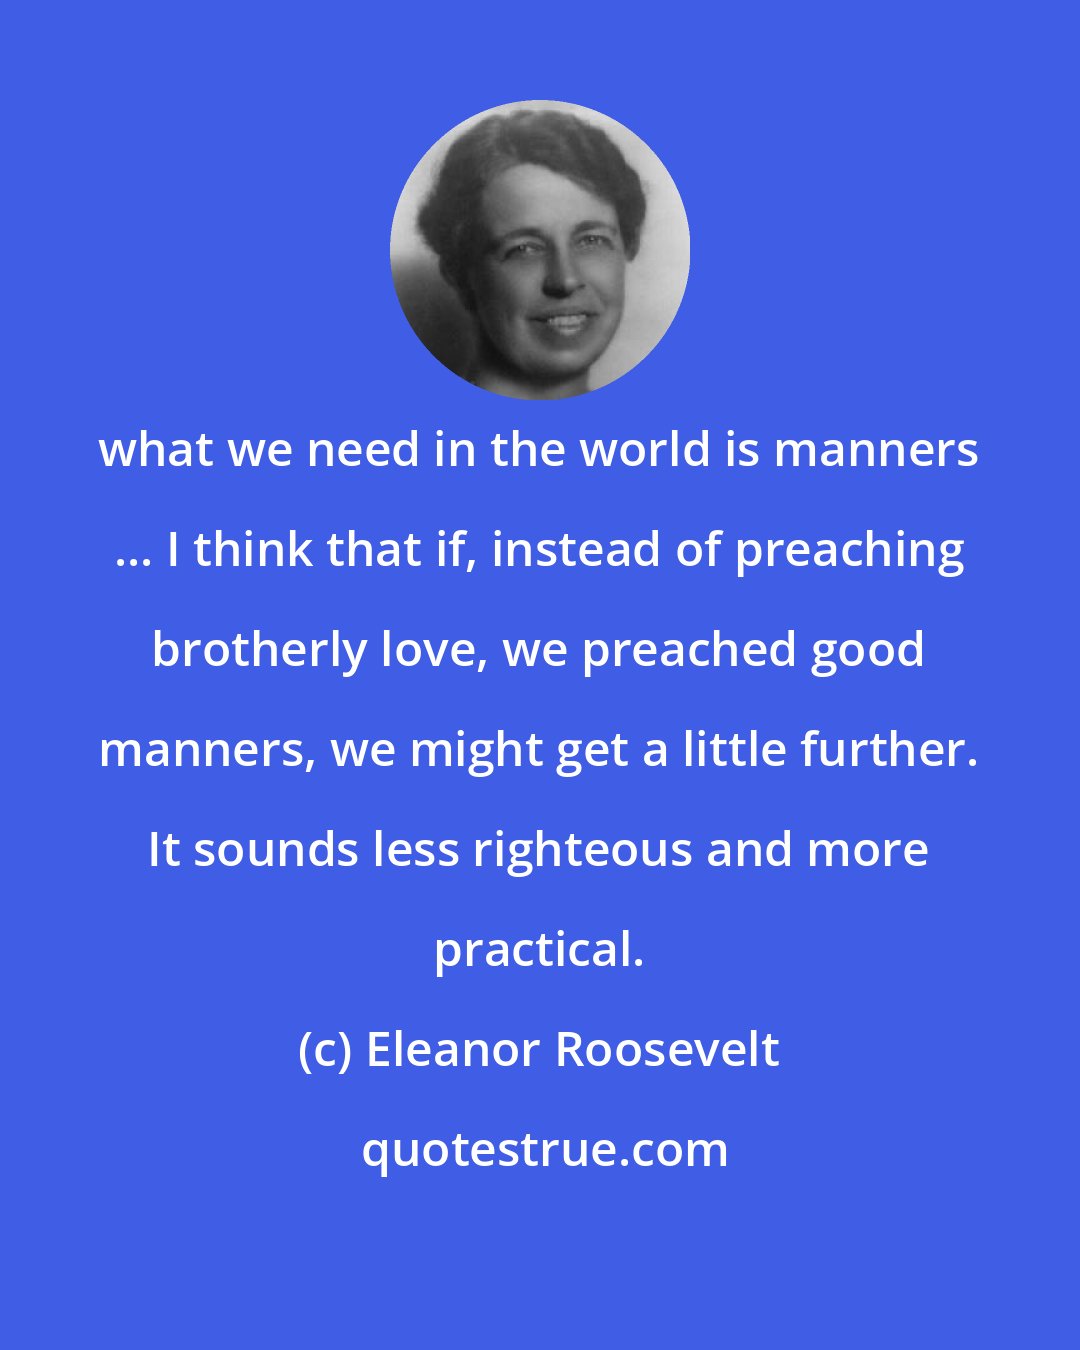 Eleanor Roosevelt: what we need in the world is manners ... I think that if, instead of preaching brotherly love, we preached good manners, we might get a little further. It sounds less righteous and more practical.